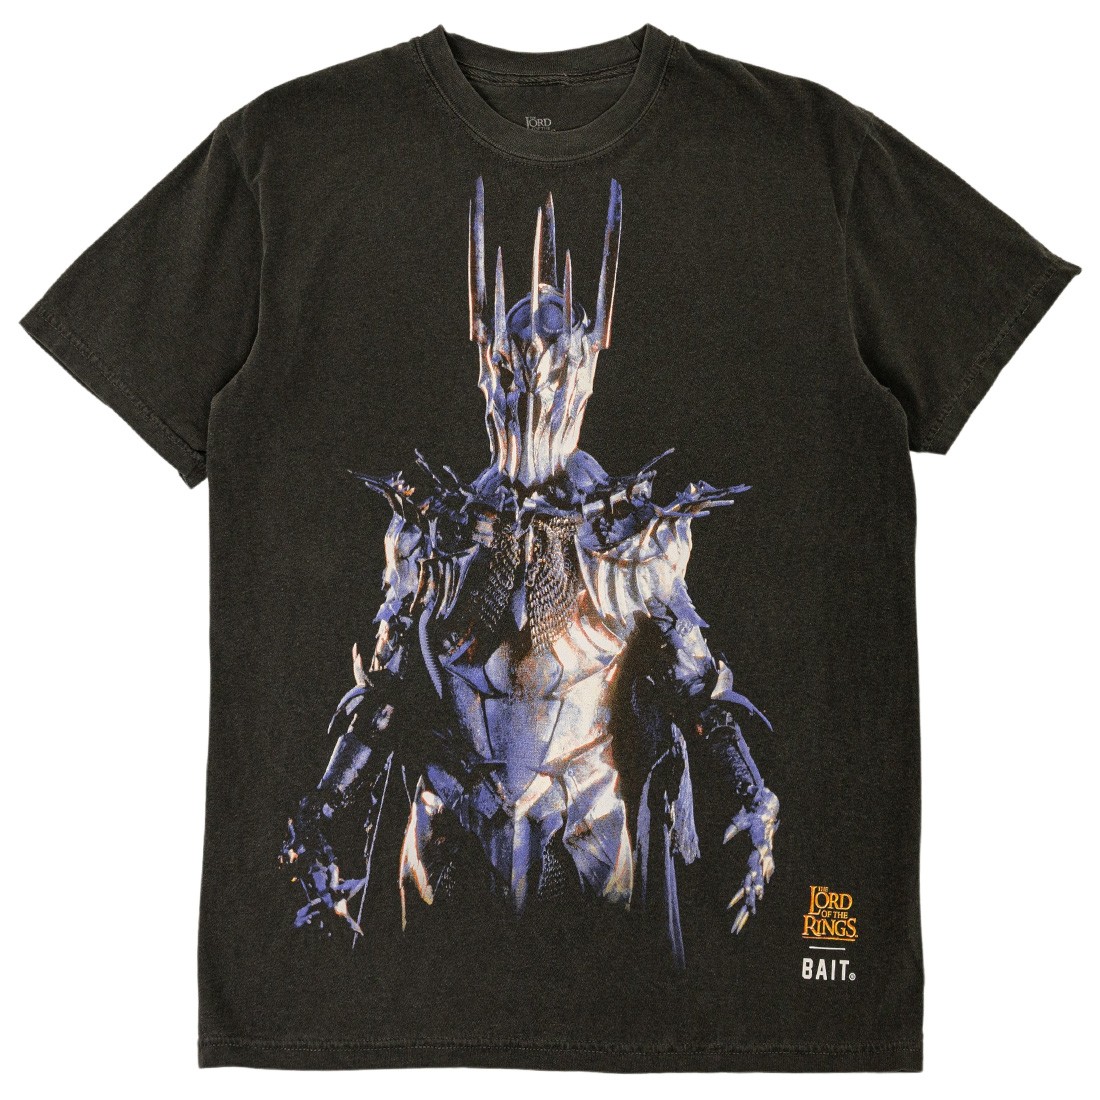 BAIT x Lord Of The Rings Men Sauron Tee (black)